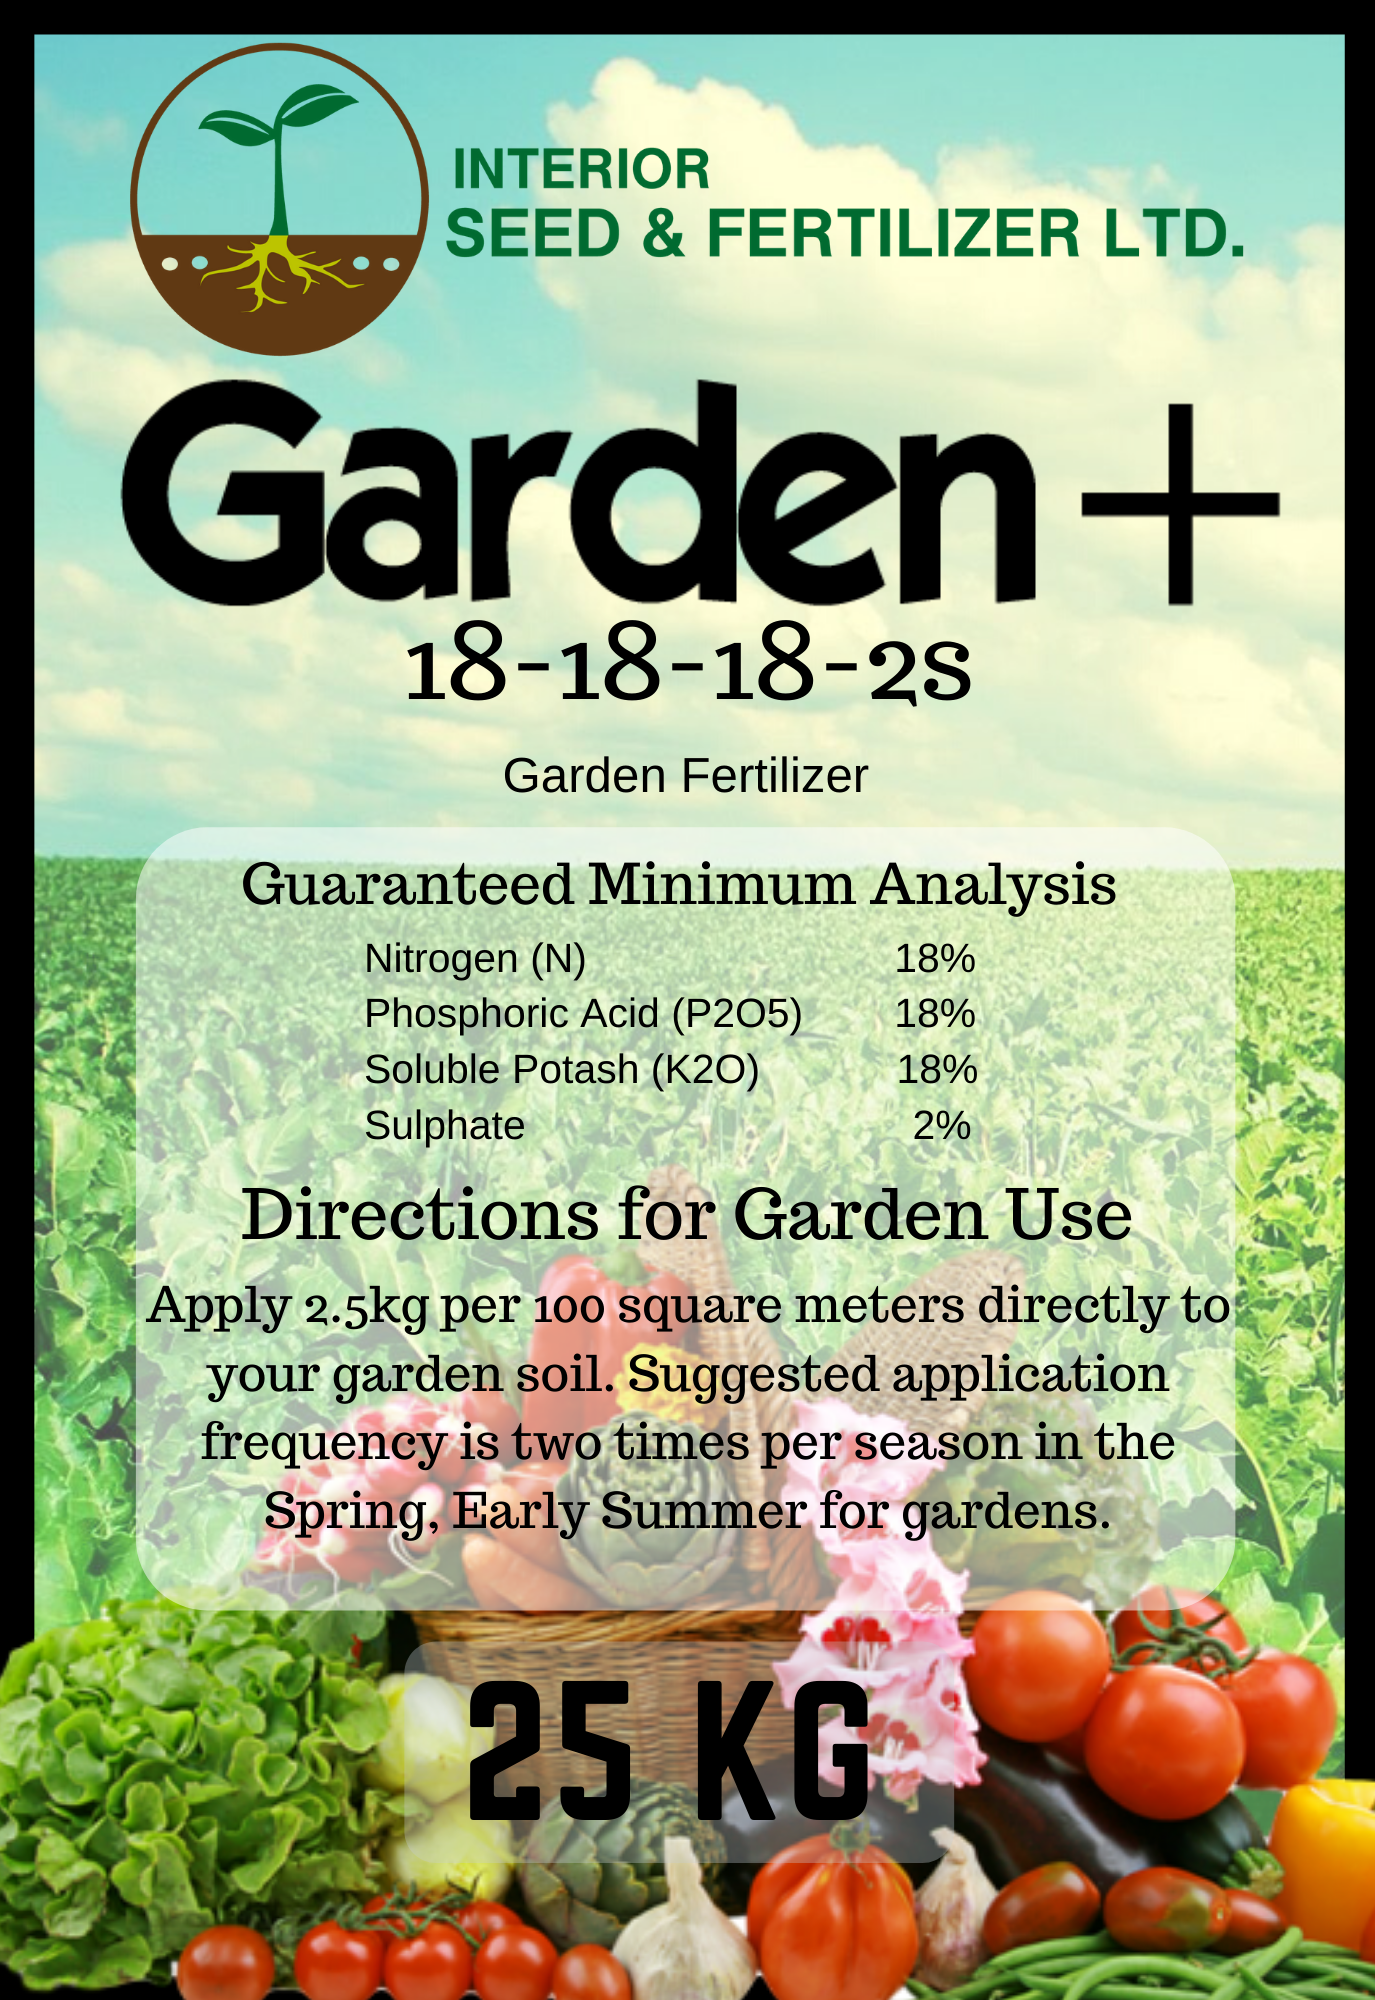 The perfect balanced garden blend specially formulated with the benefits of sulfur, perfect for Tomatoes, Onions, Lettuce, Spinach, Beets, Radish, Corn, Blueberries, Blackberries, Raspberries, and Strawberries. From Interior Seed and Fertilizer Cranbrook BC 